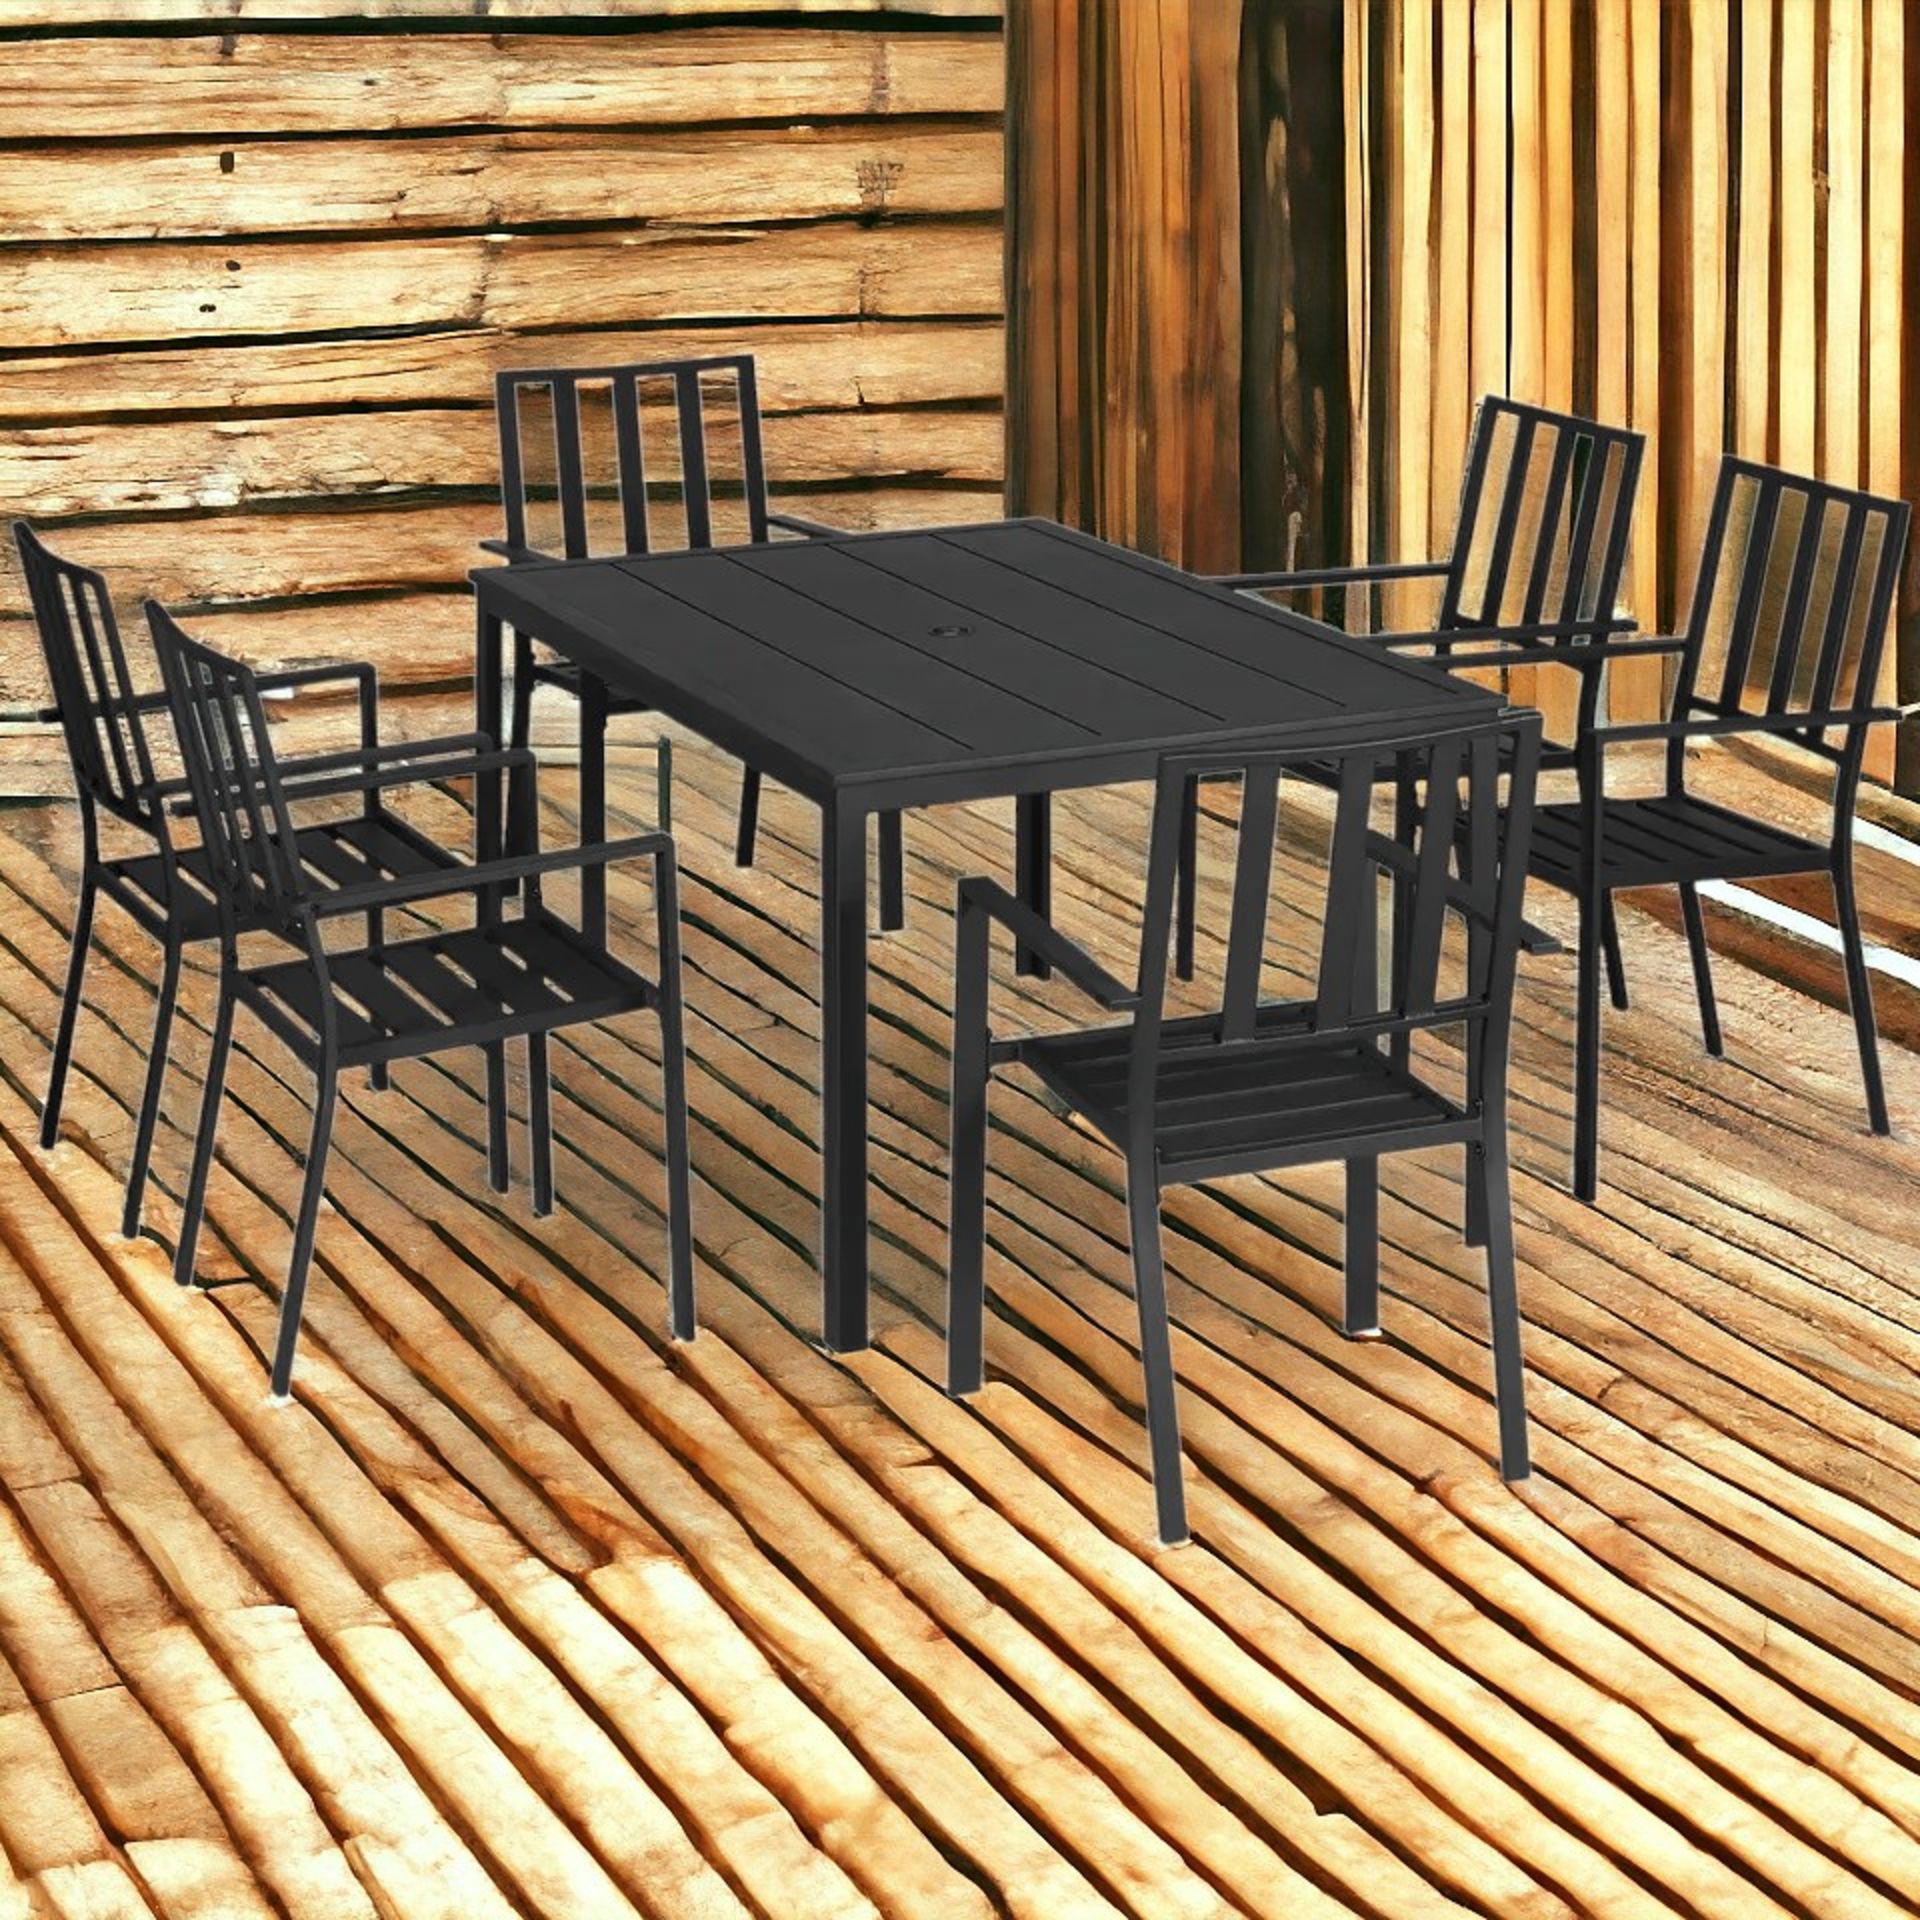 FREE DELIVERY - BRAND NEW 7 PCS GARDEN DINING SET W/ STACKABLE CHAIRS AND METAL TOP TABLE, BLACK - Bild 2 aus 2